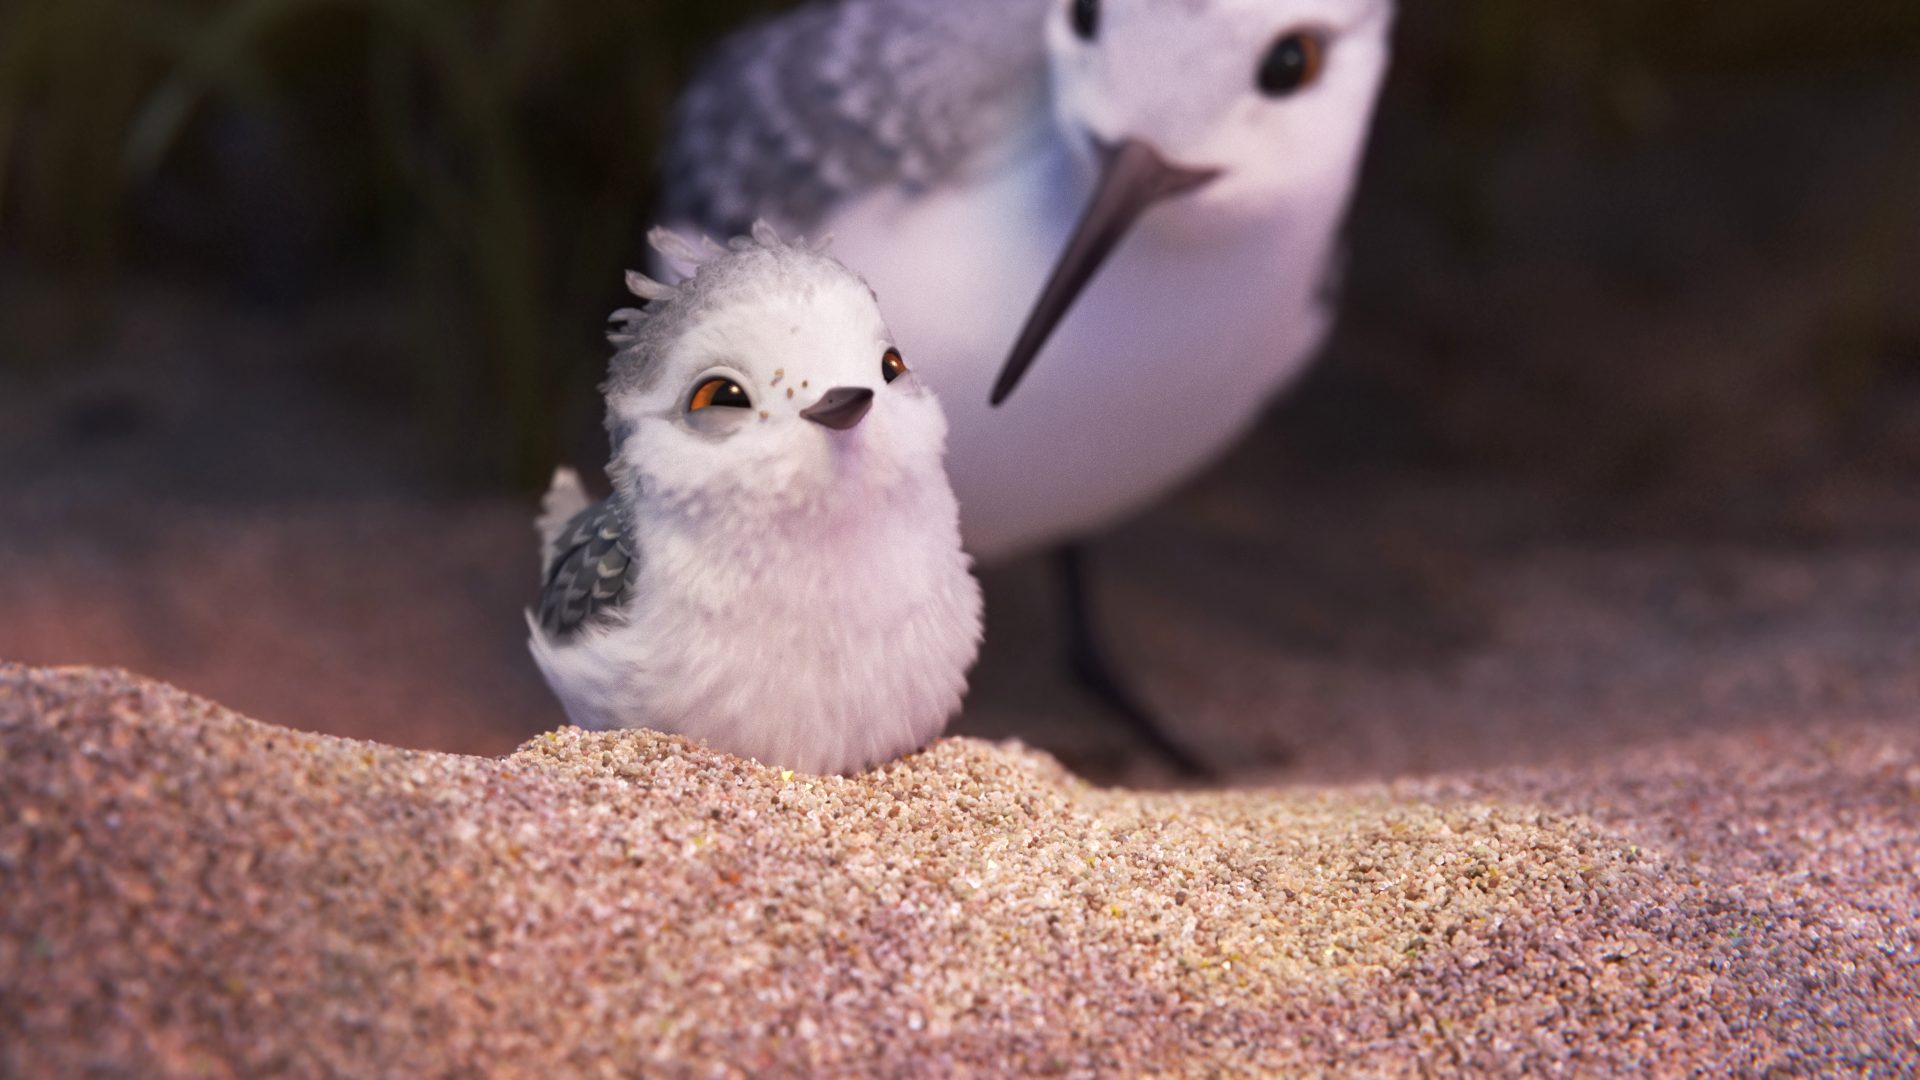 PIPER. In Pixar Animation Studios' new short, 'Piper,' a hungry sandpiper hatchling discovers that finding food without momâs help isnât so easy. Directed by Alan Barillaro, the short debuts in front of 'Finding Dory.' Photo courtesy of Disney Pixar 